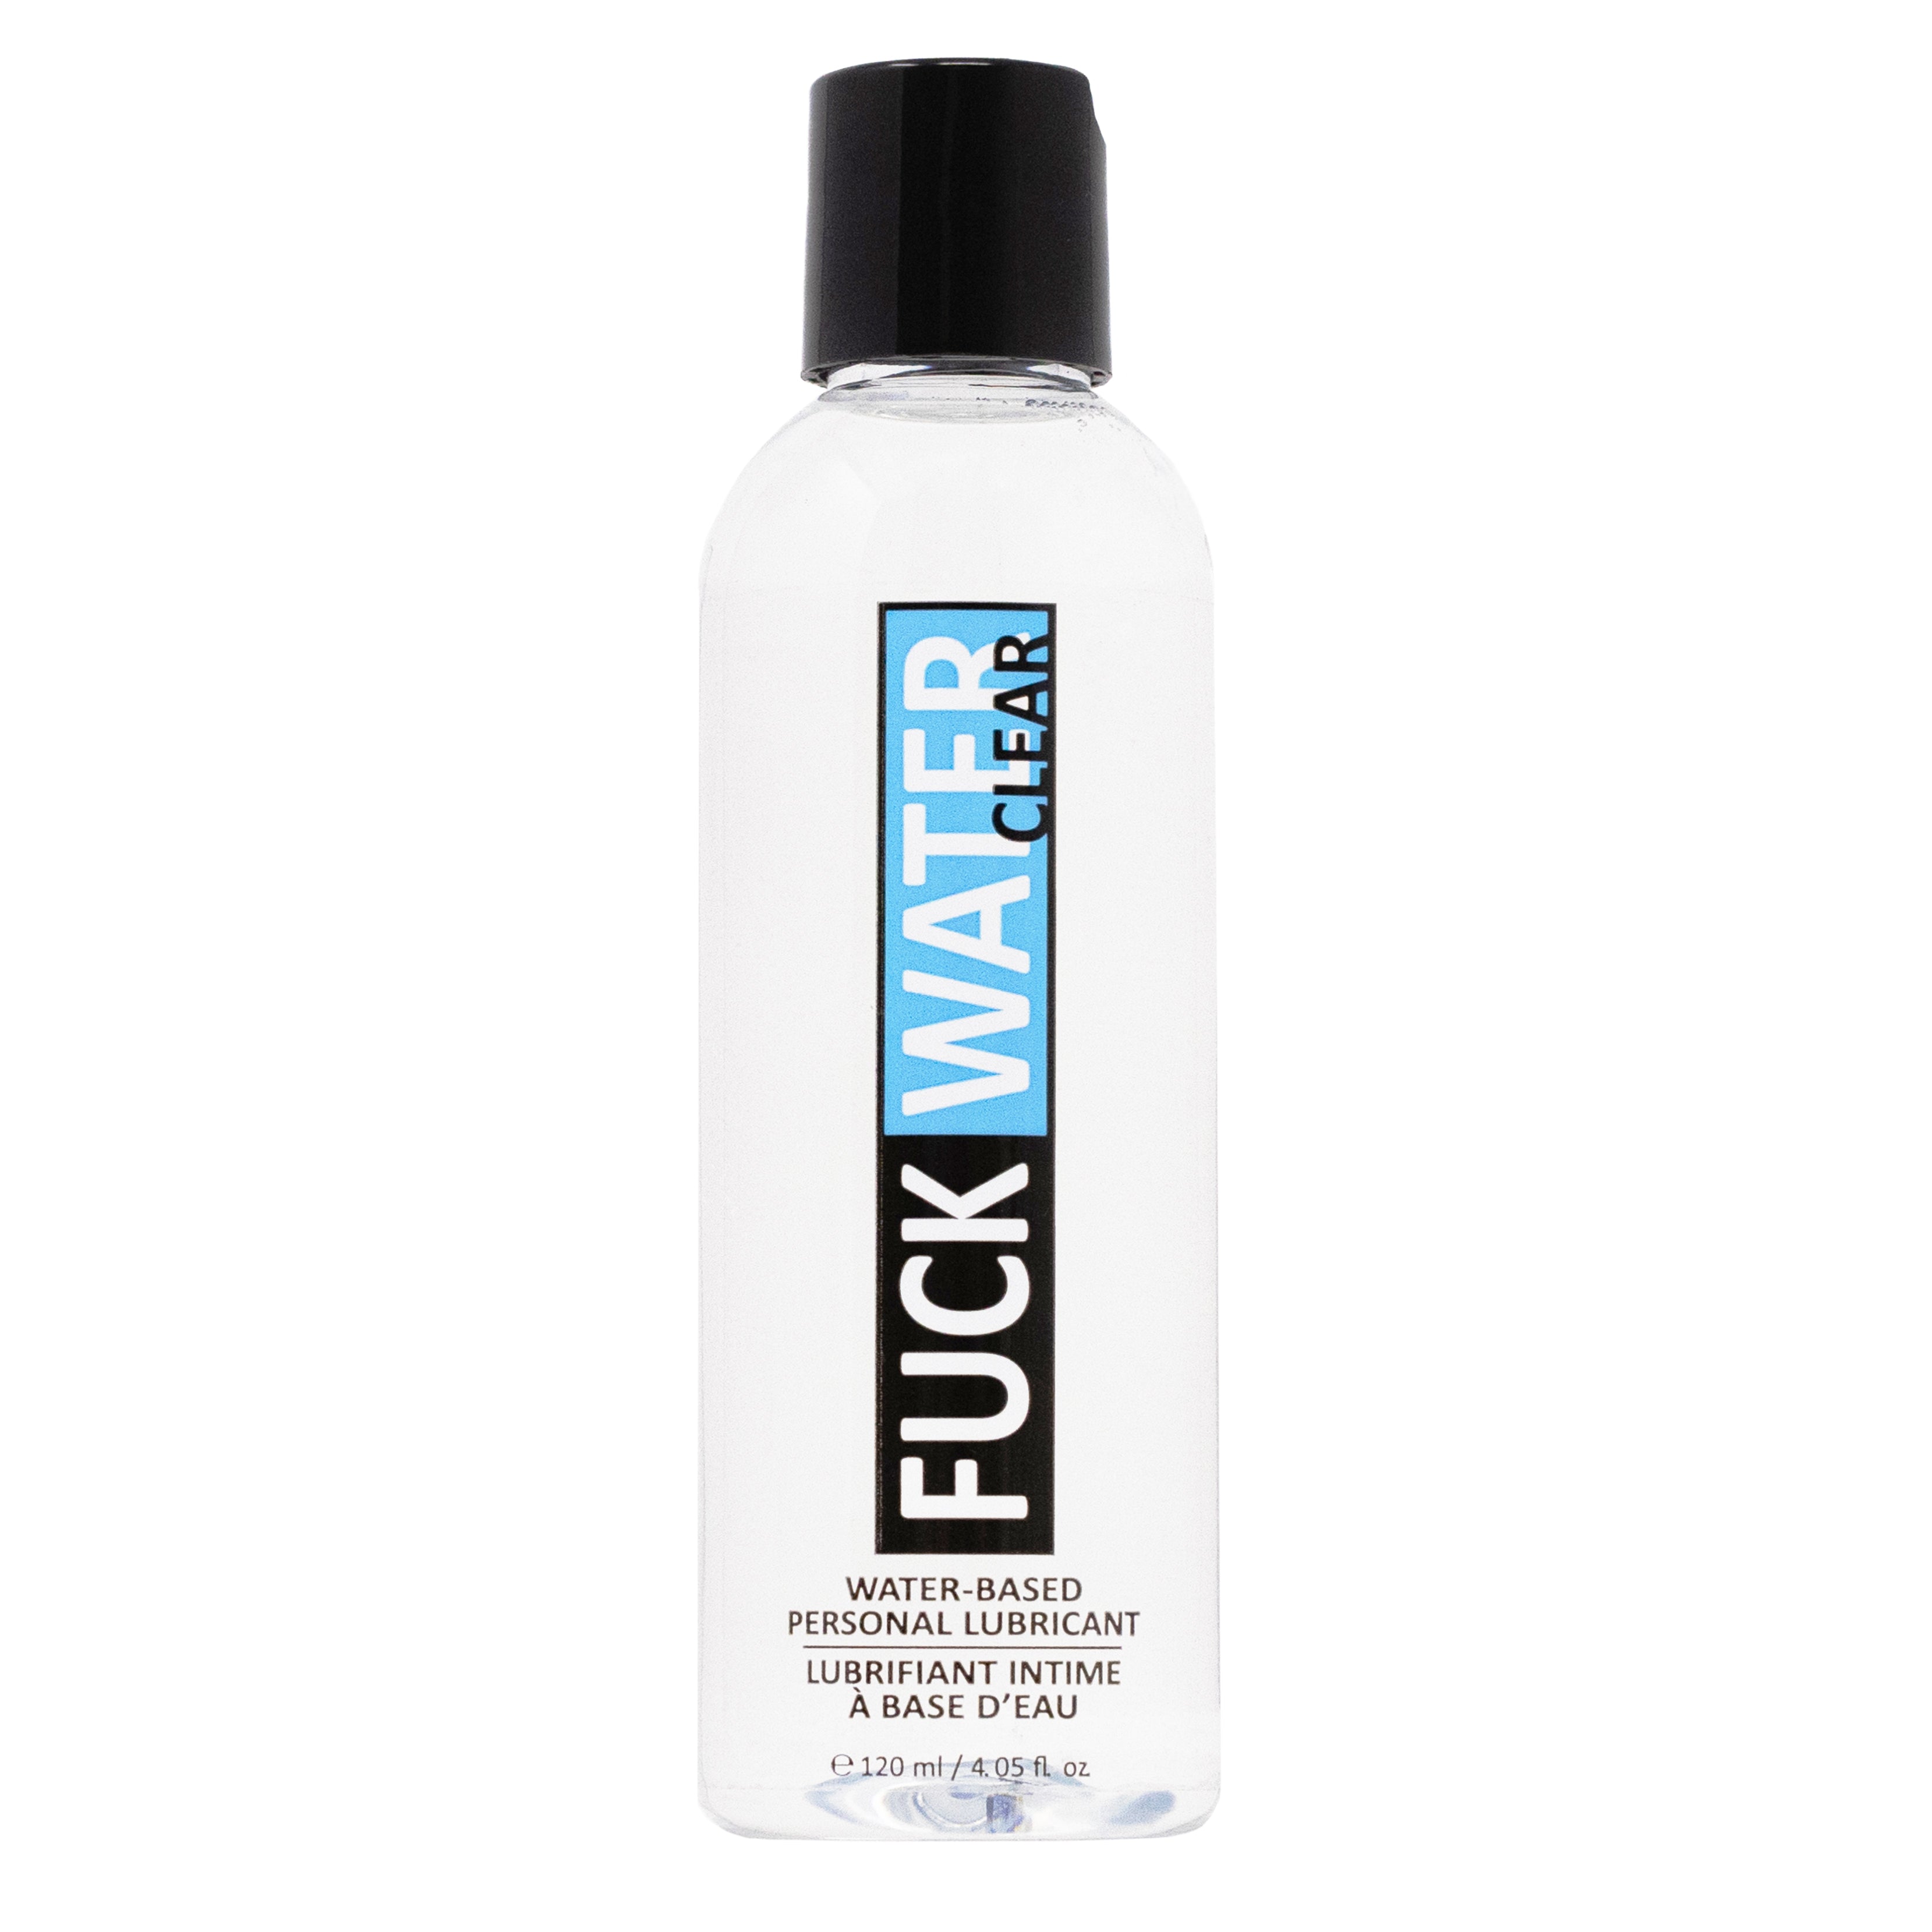 Fuck Water Clear 4.05oz Water Based Personal Lubricant Fuck Water